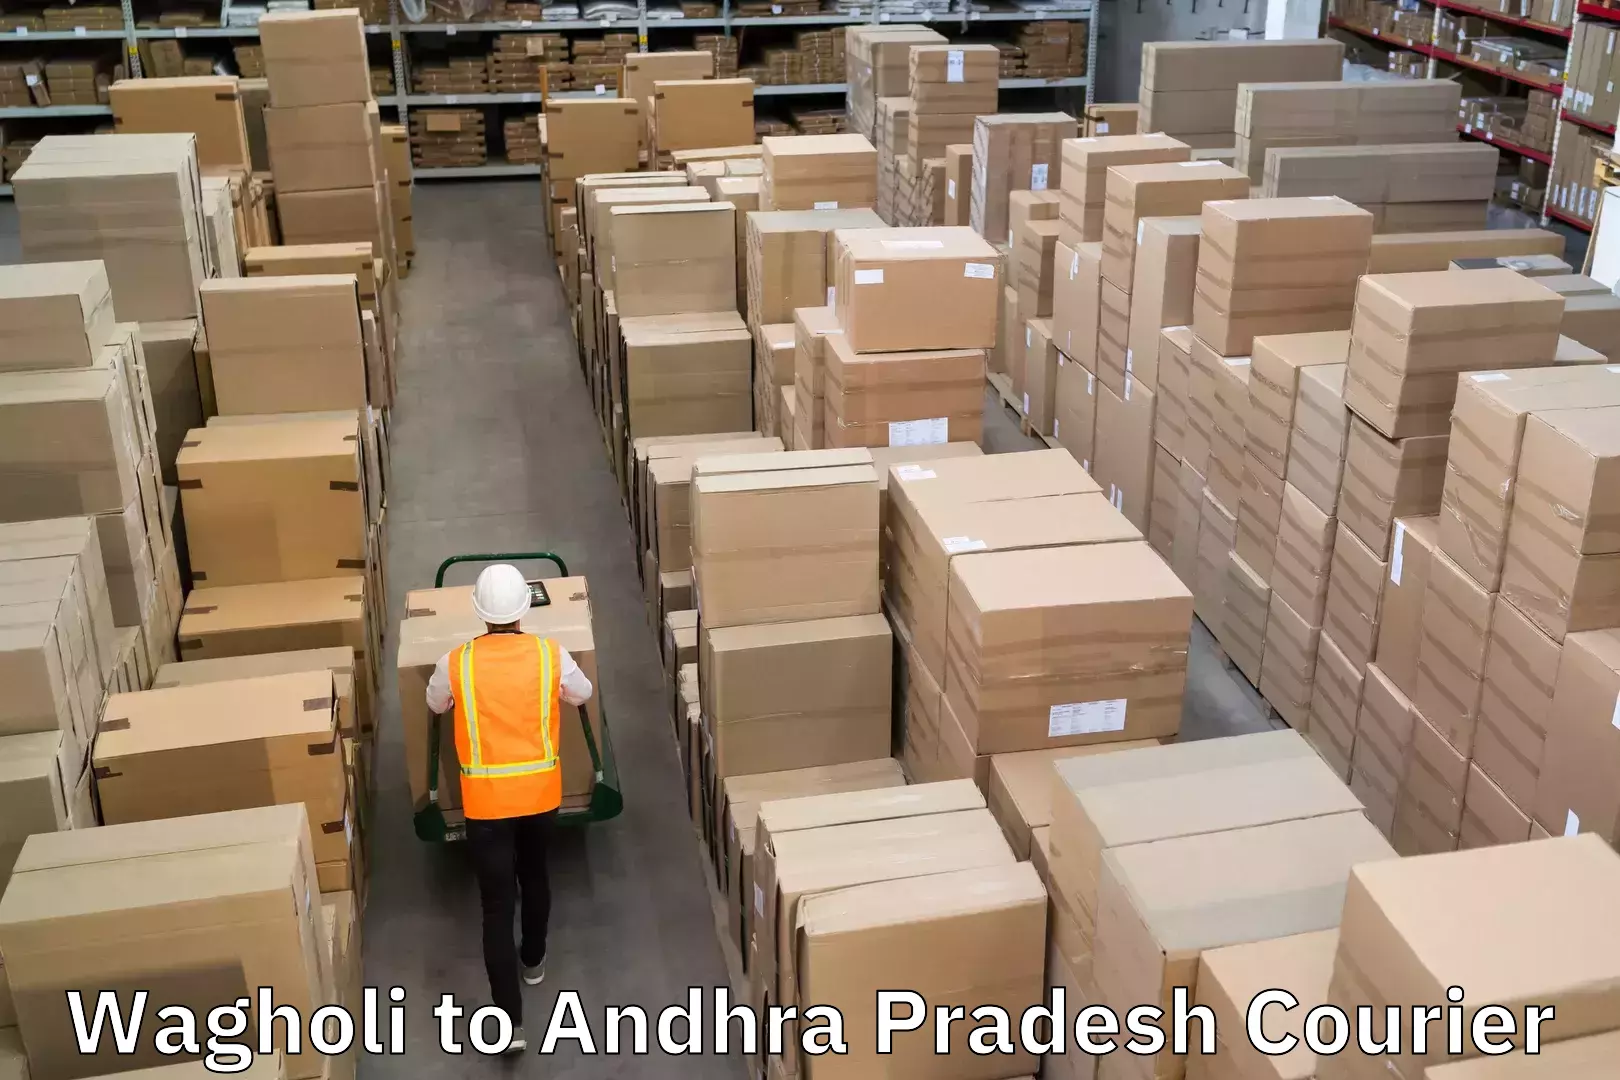 Express delivery capabilities Wagholi to Andhra Pradesh